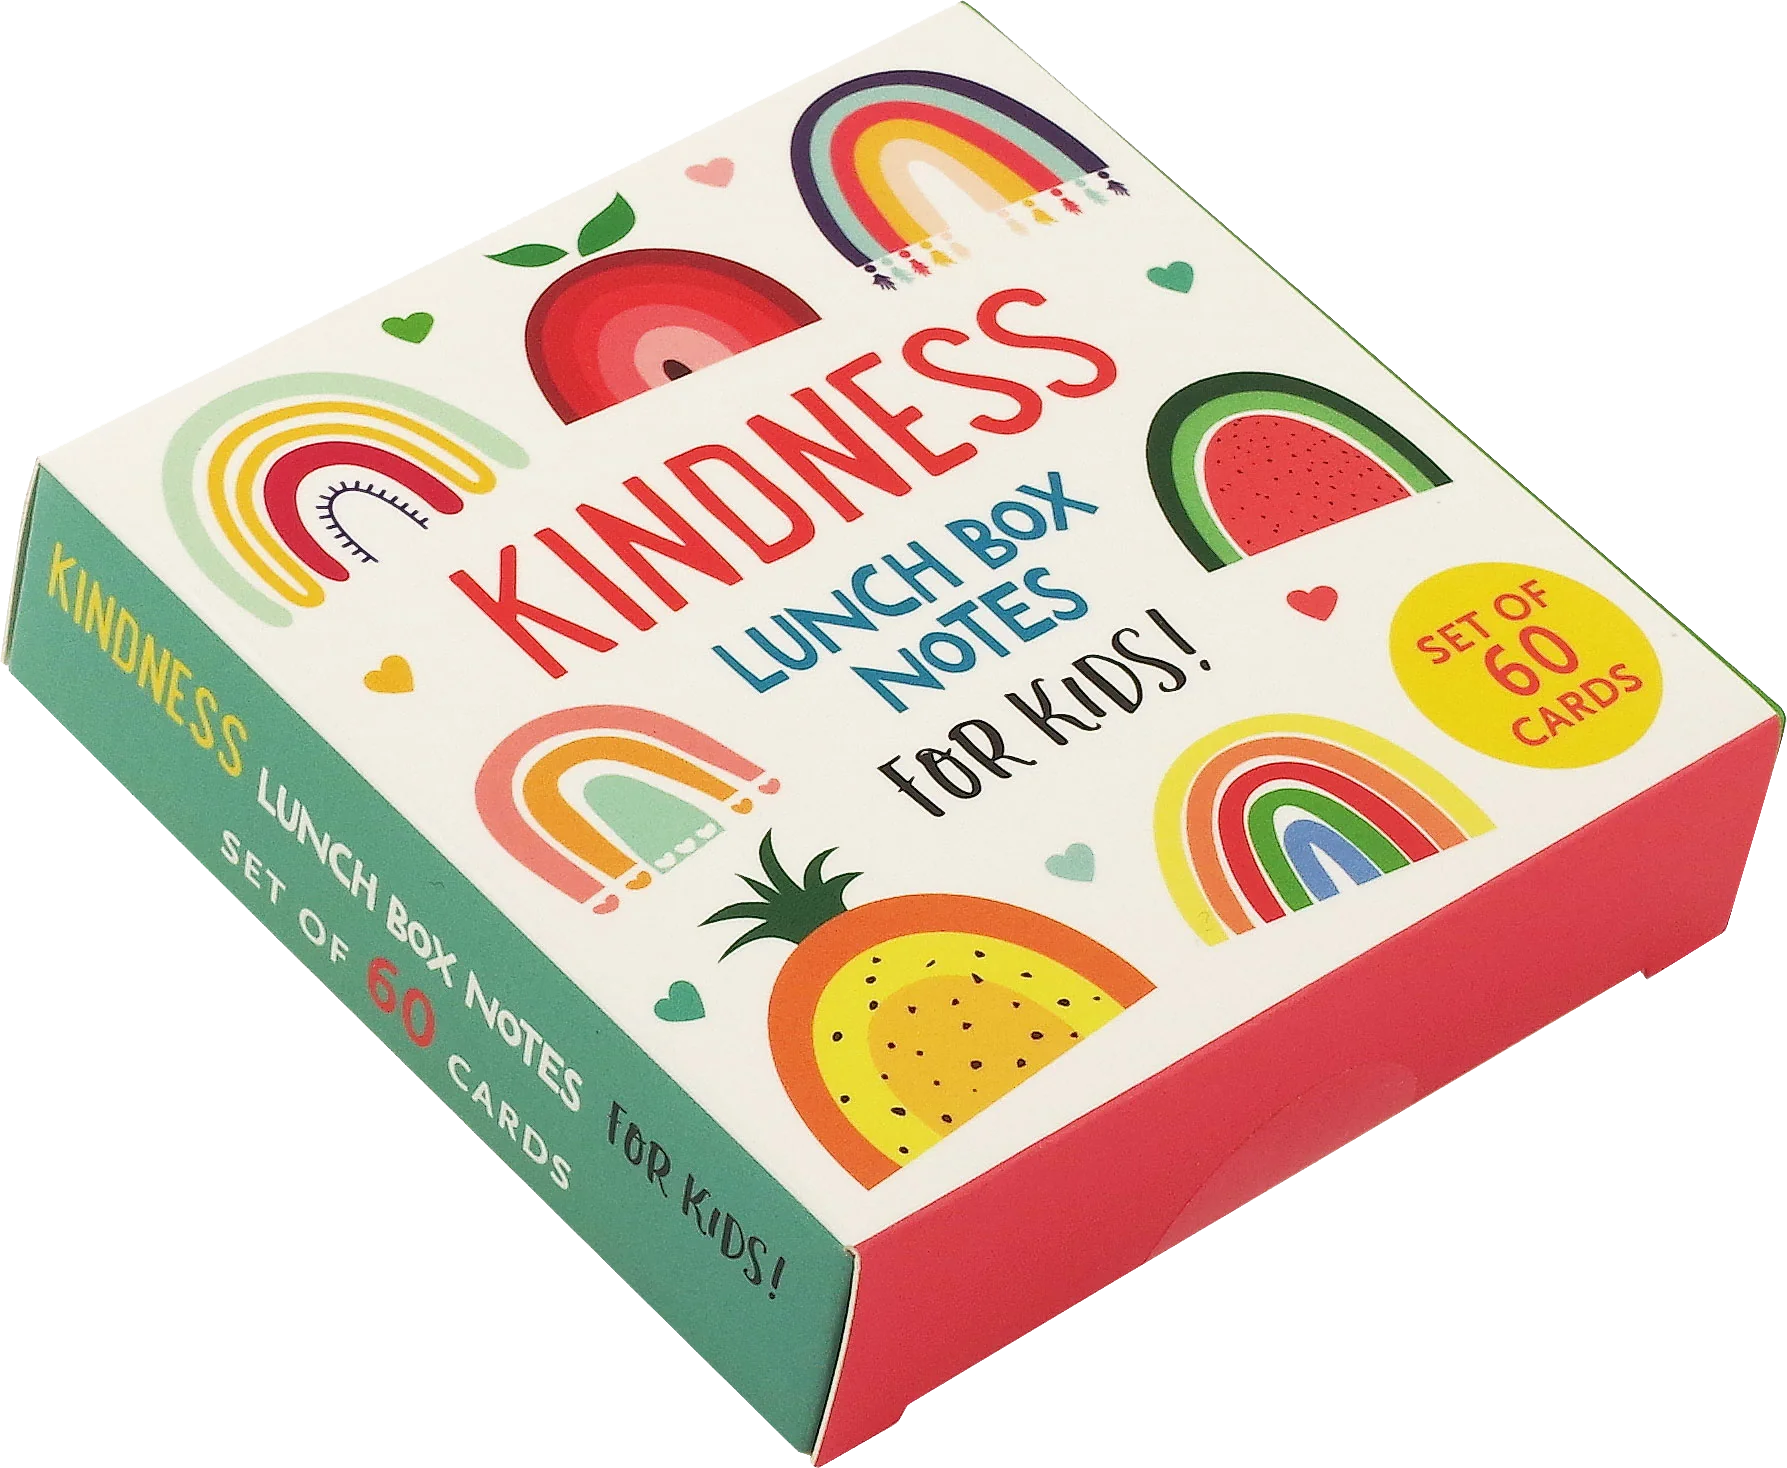 Kindness Lunch Box Notes for Kids! (Set of 60 Cards)